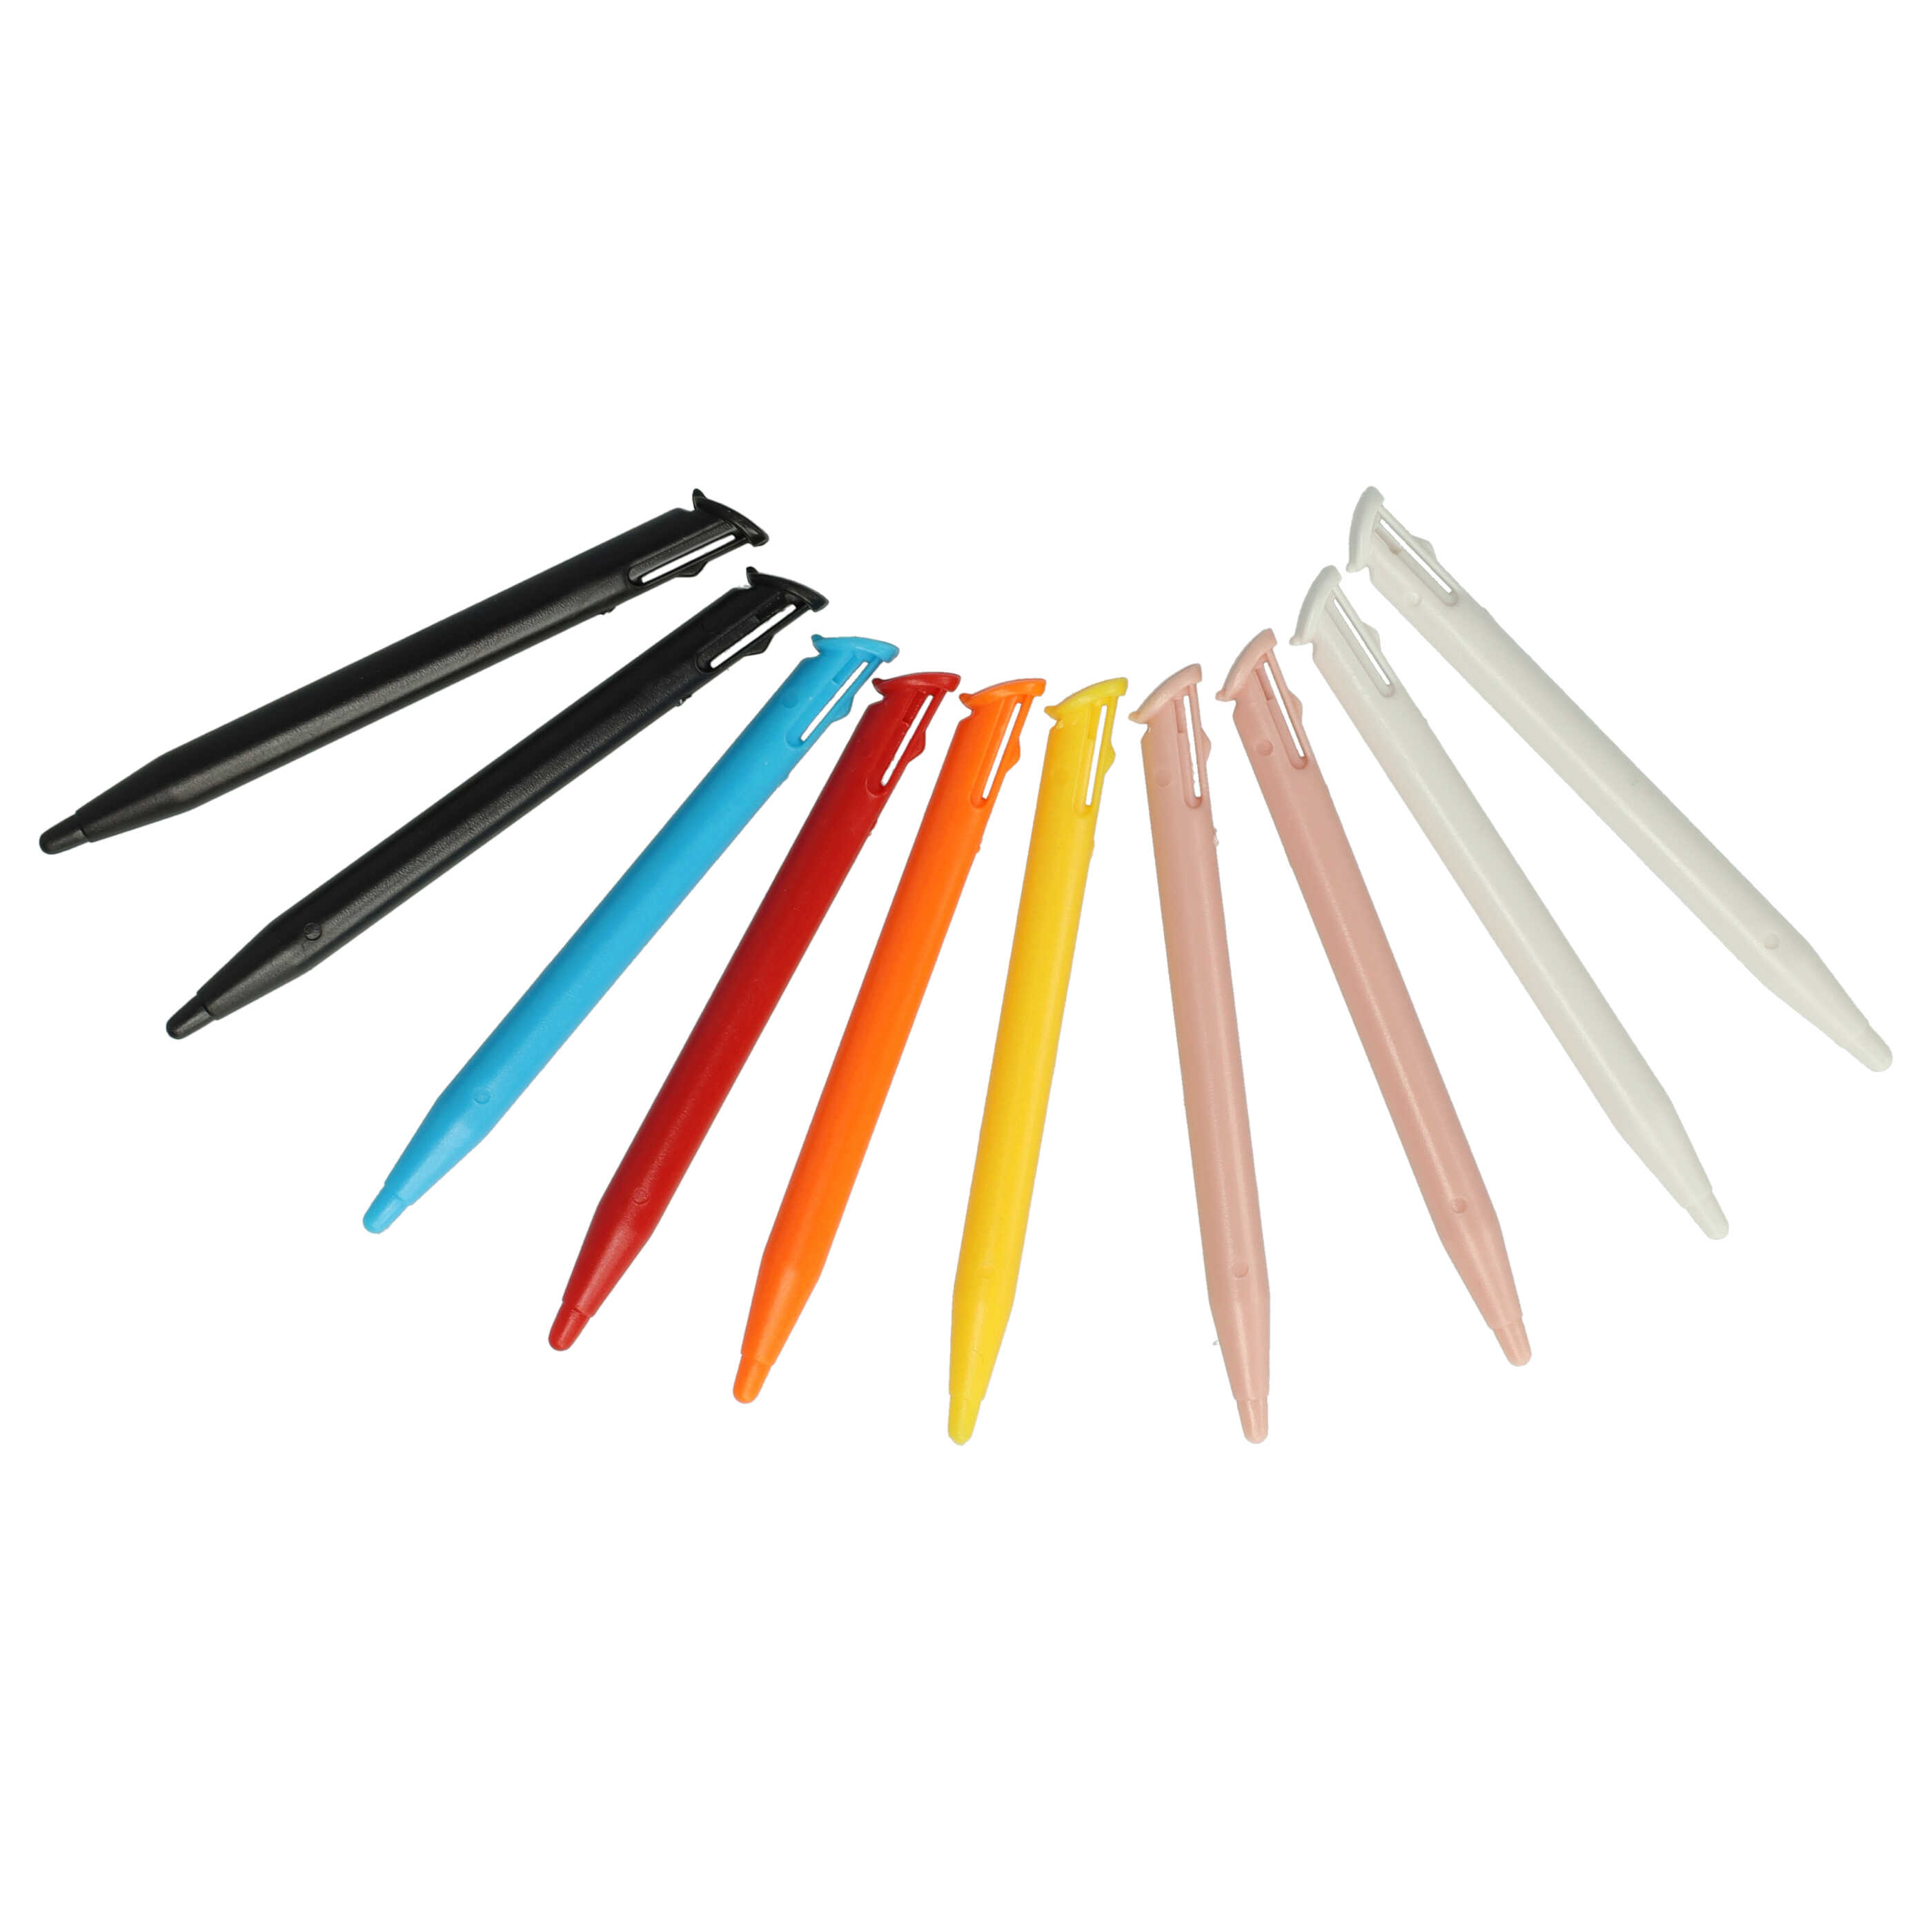 10x Touch Pens suitable for Nintendo 2DS LL, 2DS XL Game Console - black, orange, pink, white, blue, red, yell